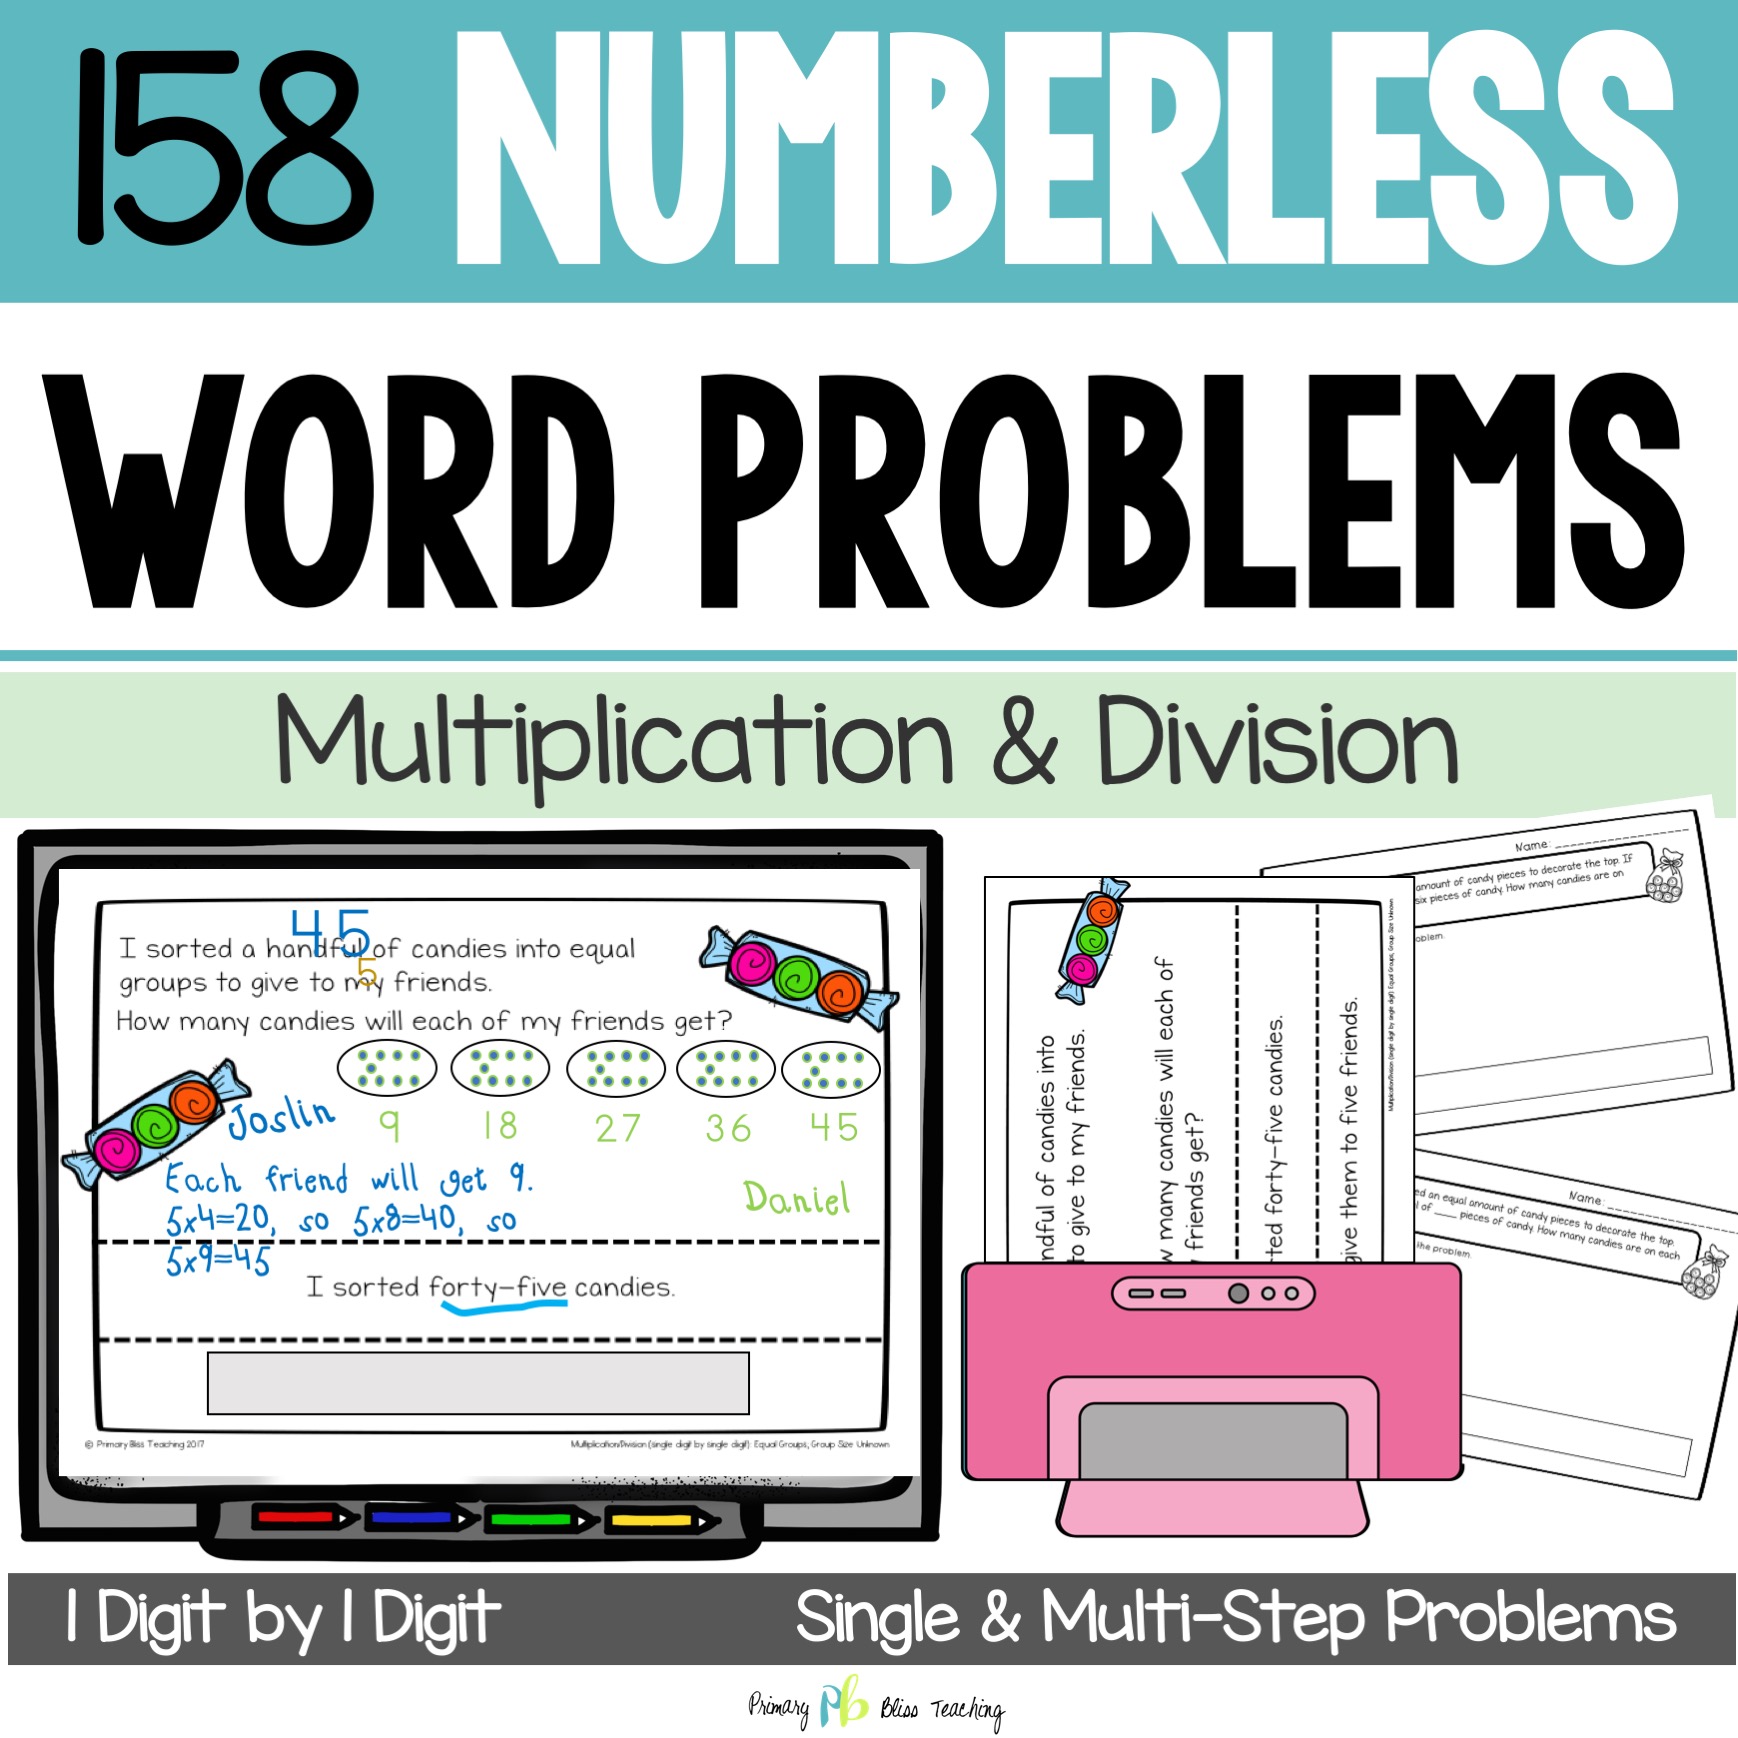 number-talks-numberless-math-word-problems-single-by-single-digit